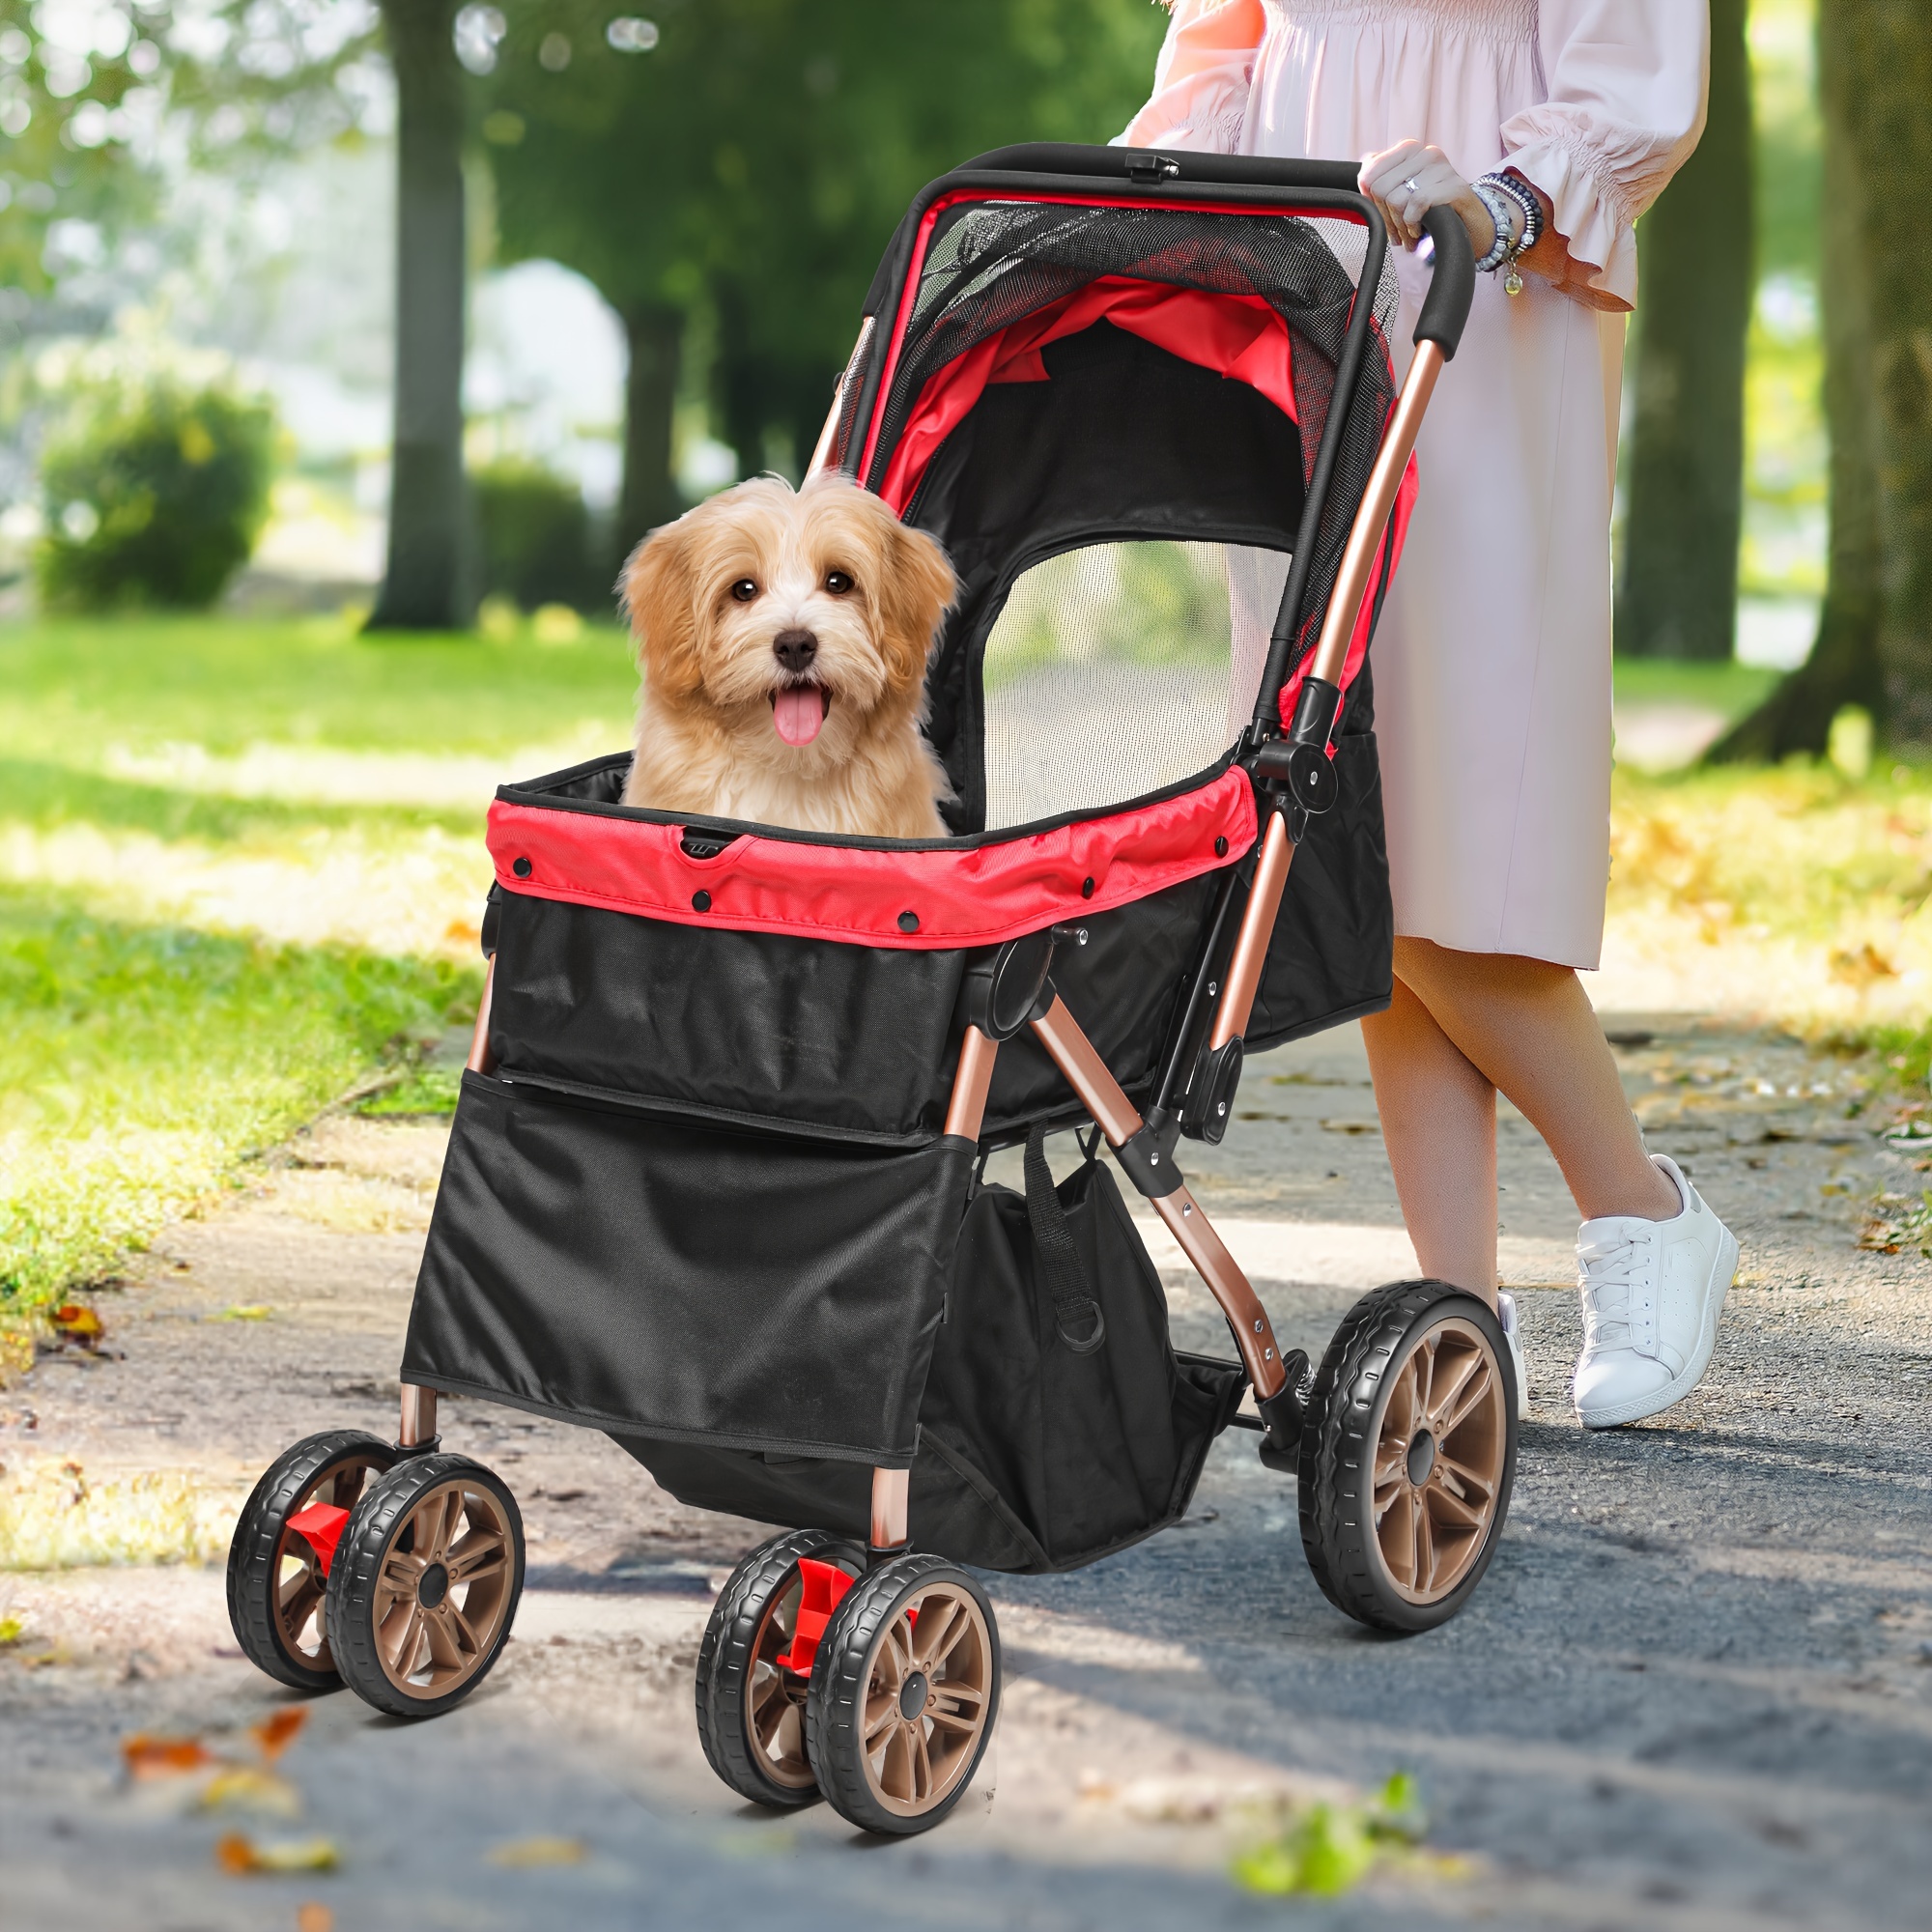 

Dwvo Pet Stroller 4 Wheels Dog Stroller Folding Carrier W/cup Holders And